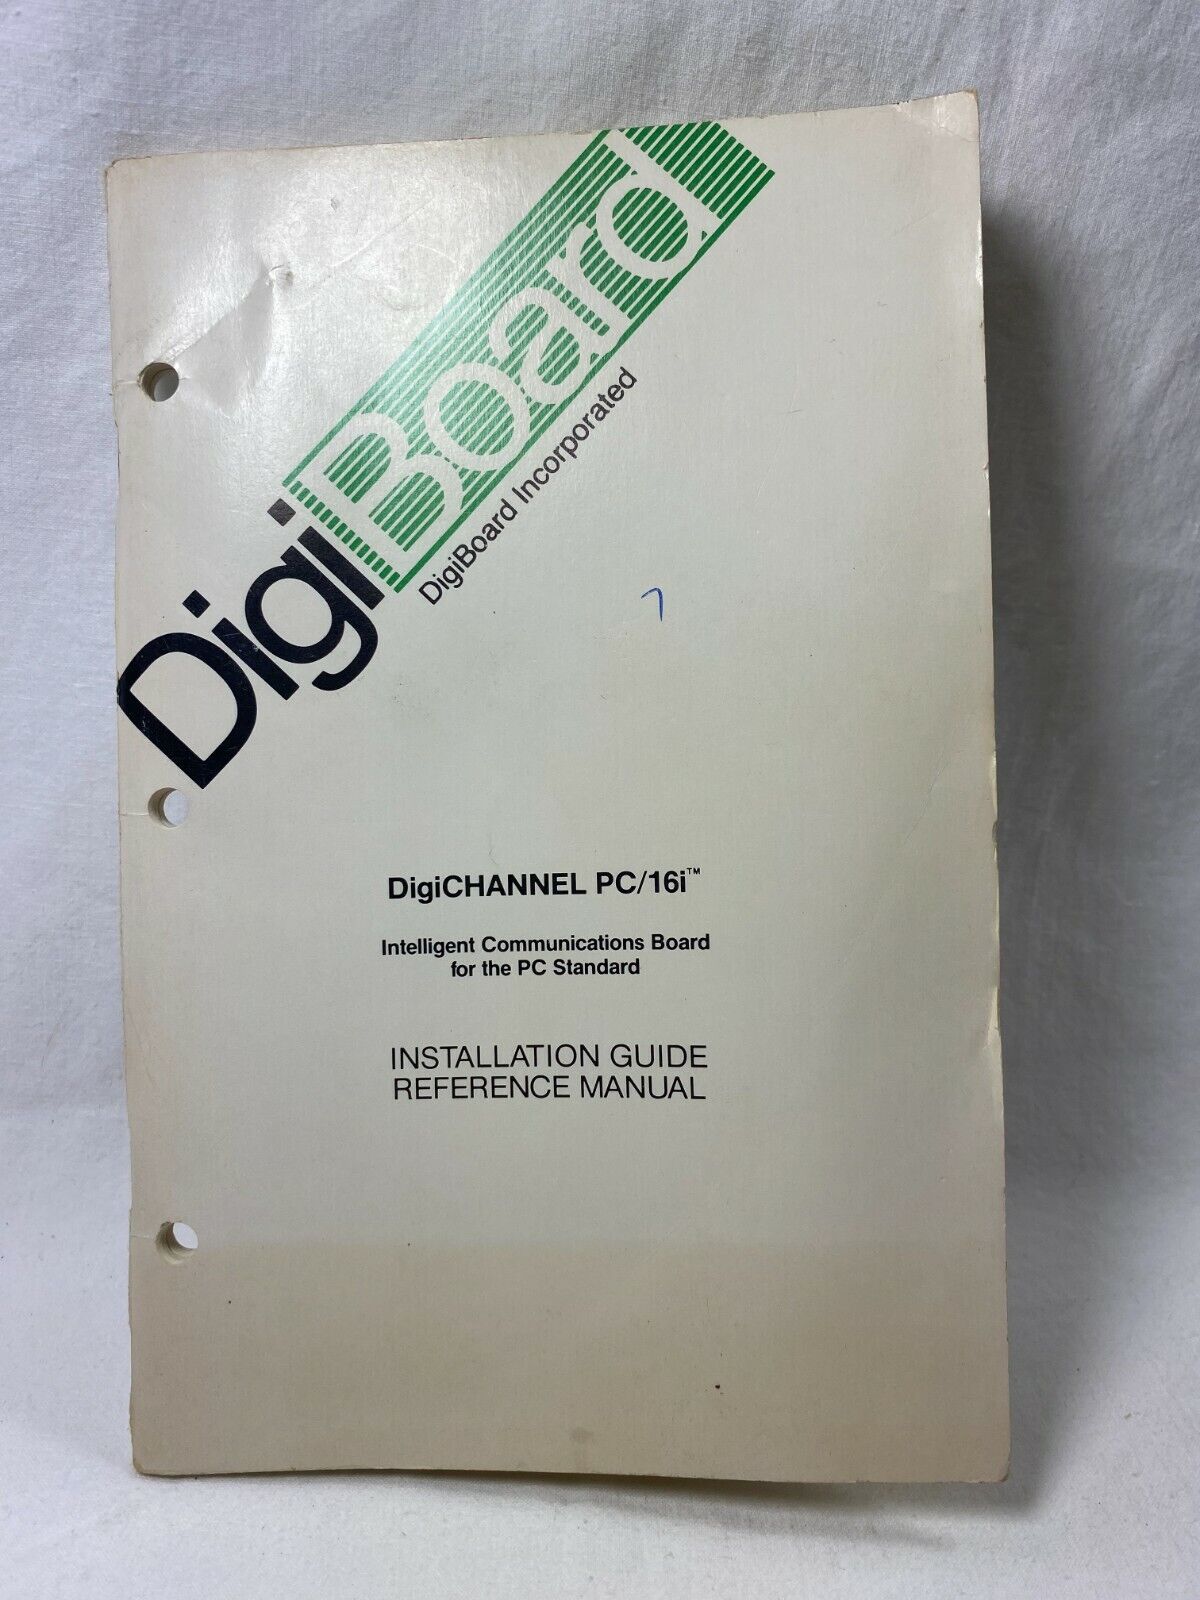 DigiChannel Connection Box PC/16i MC/16i 16 DB25 digiboard 1989 - MANUAL ONLY